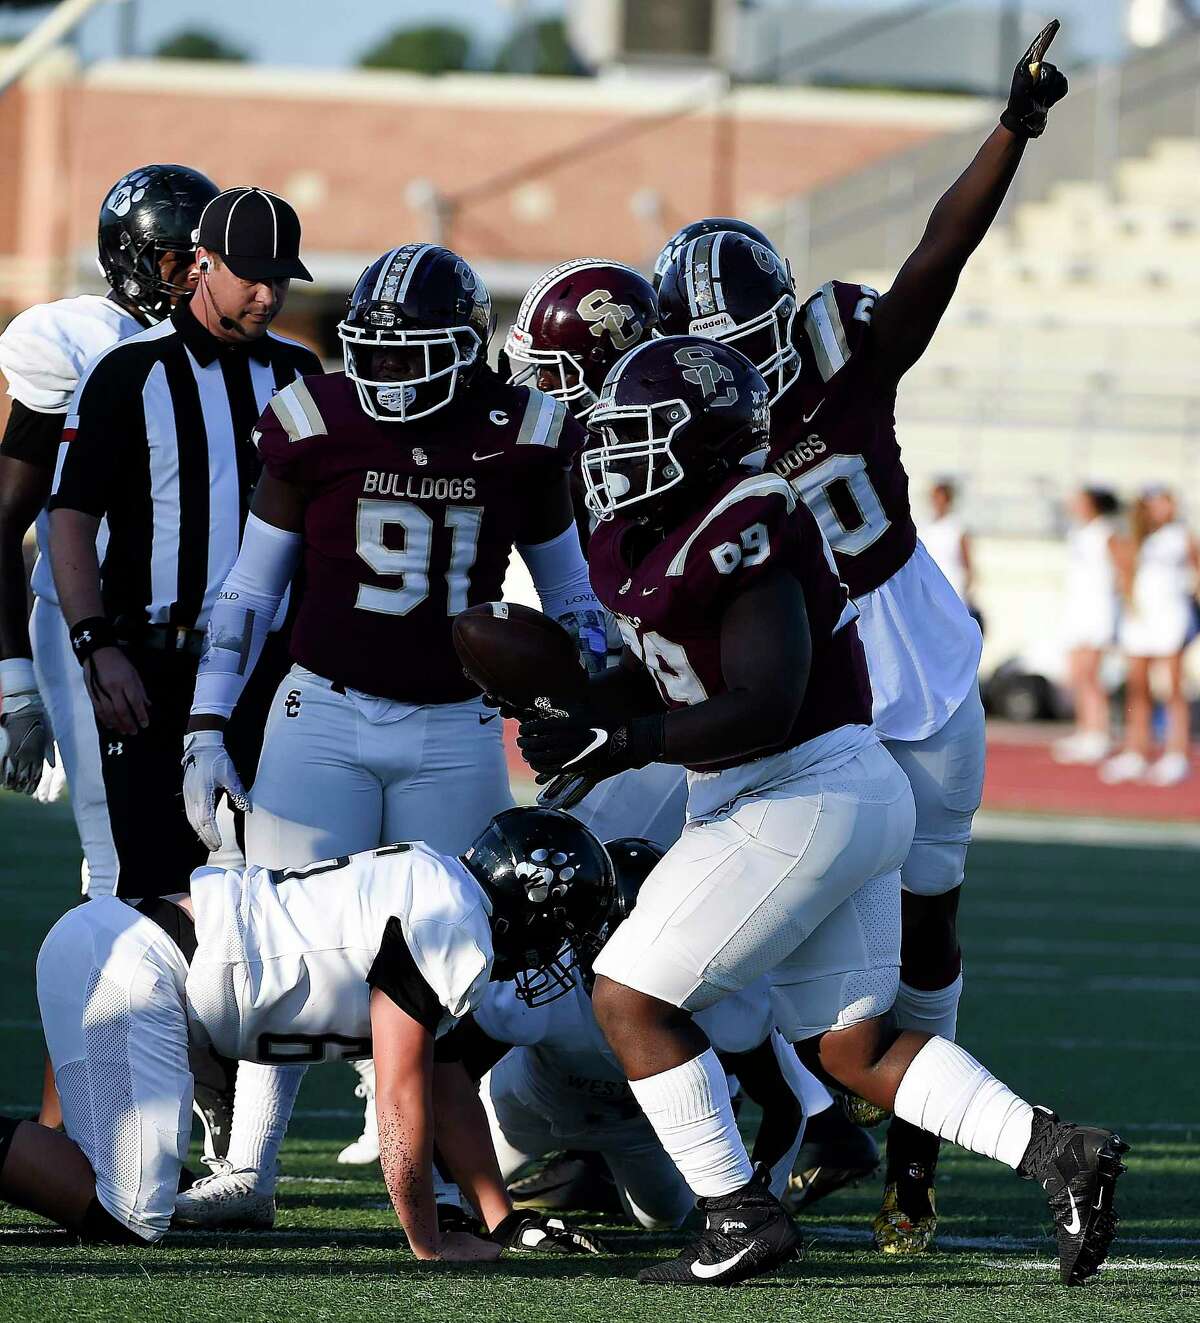 Summer Creek defensive lineman Caden Rain, right, signals possession after defensive lineman Amantie Lockhart, second from right, recovered the fumble of Westside wide receiver Josiah Scott during the first half of a high school football game, Saturday, Sept. 18, 2021, in Humble.